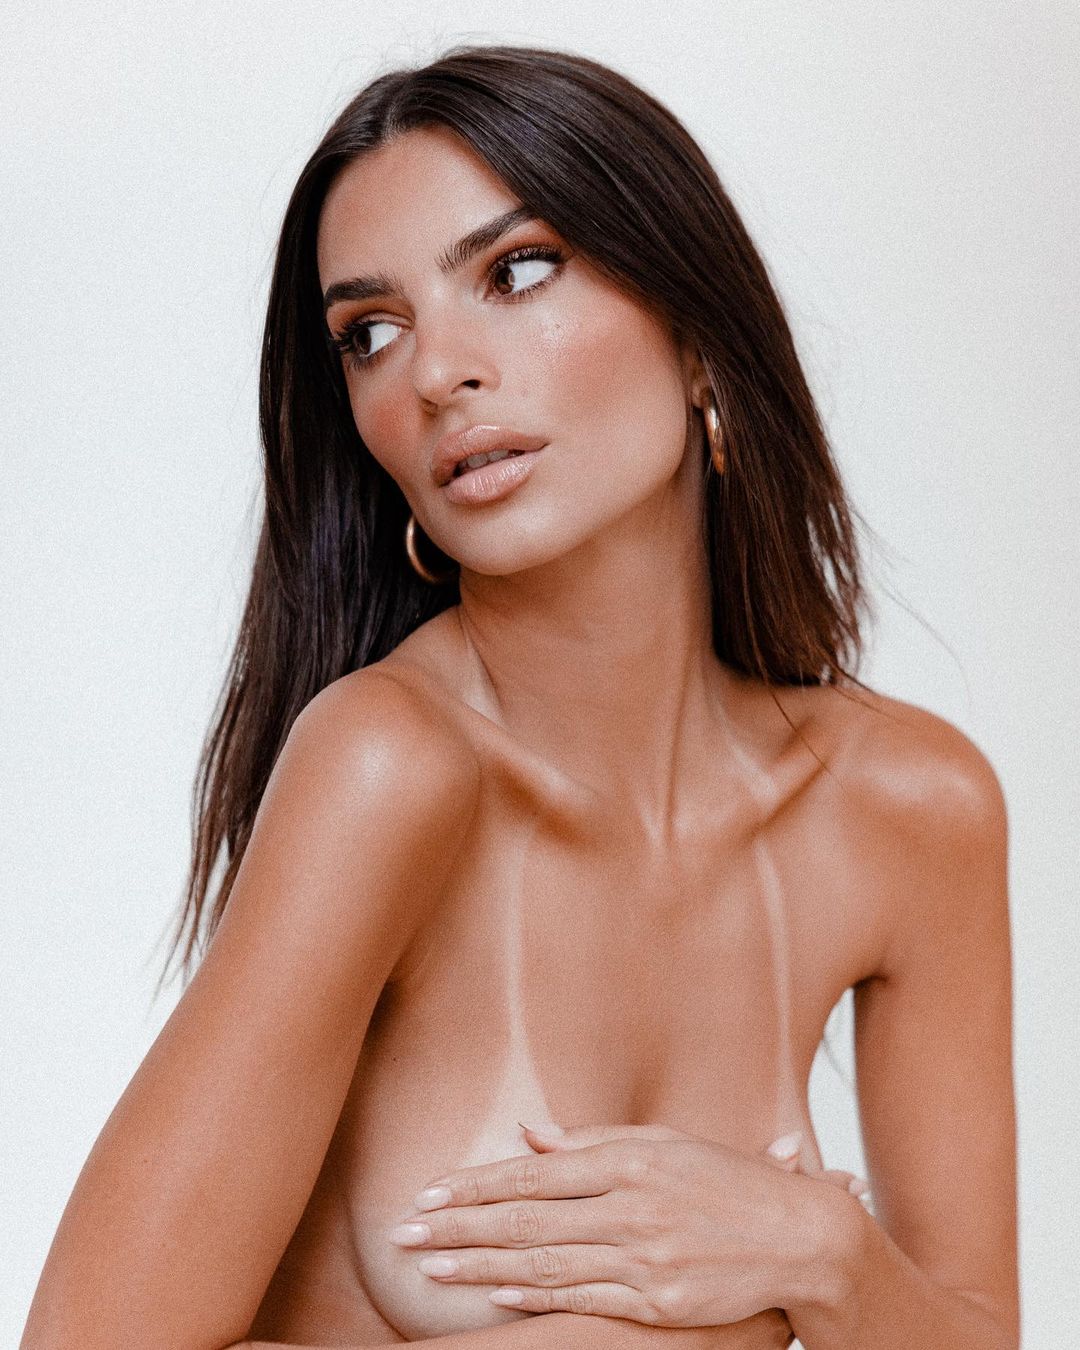 Emily Ratajkowski Goes Viral After Going Topless and Showing Tan Lines To  Promote New Bikini Collection - Page 4 of 4 - BlackSportsOnline